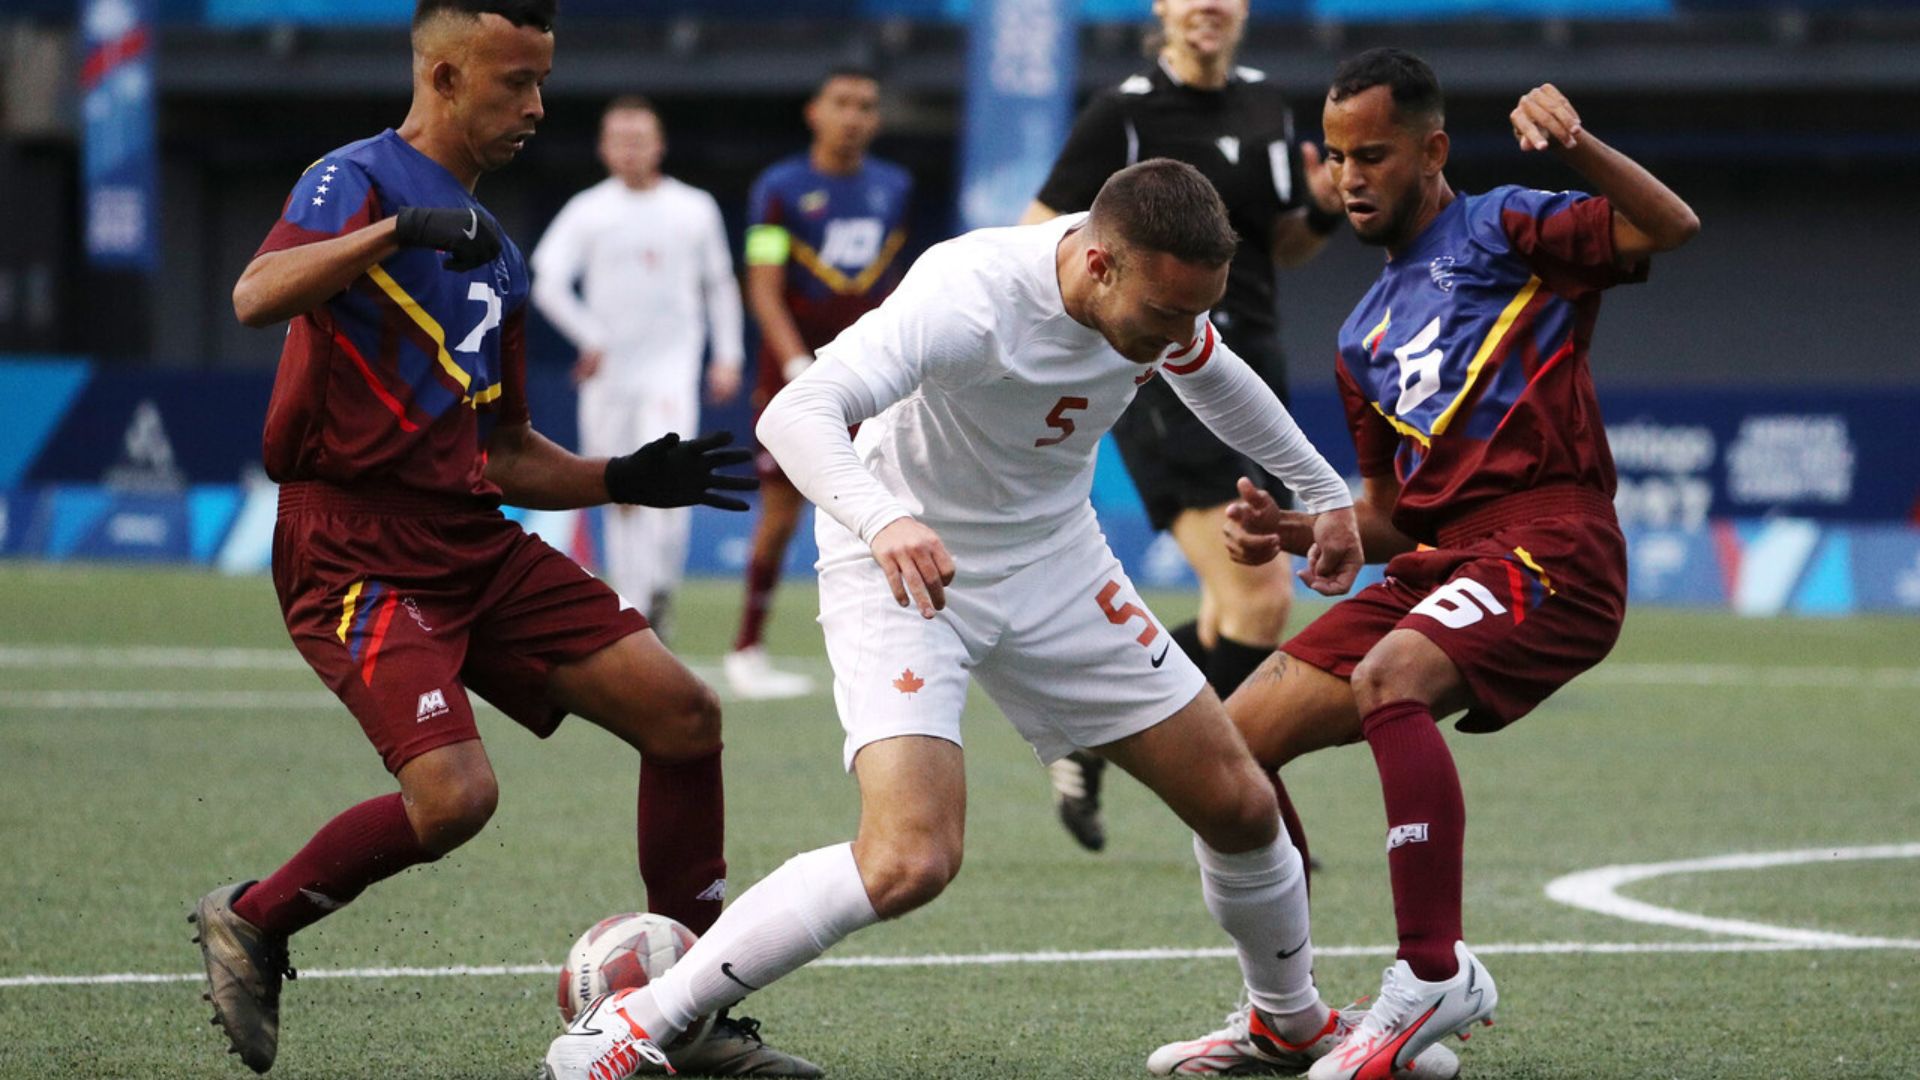 Venezuela Starts With Victory Secured in Injury Time in CP Football